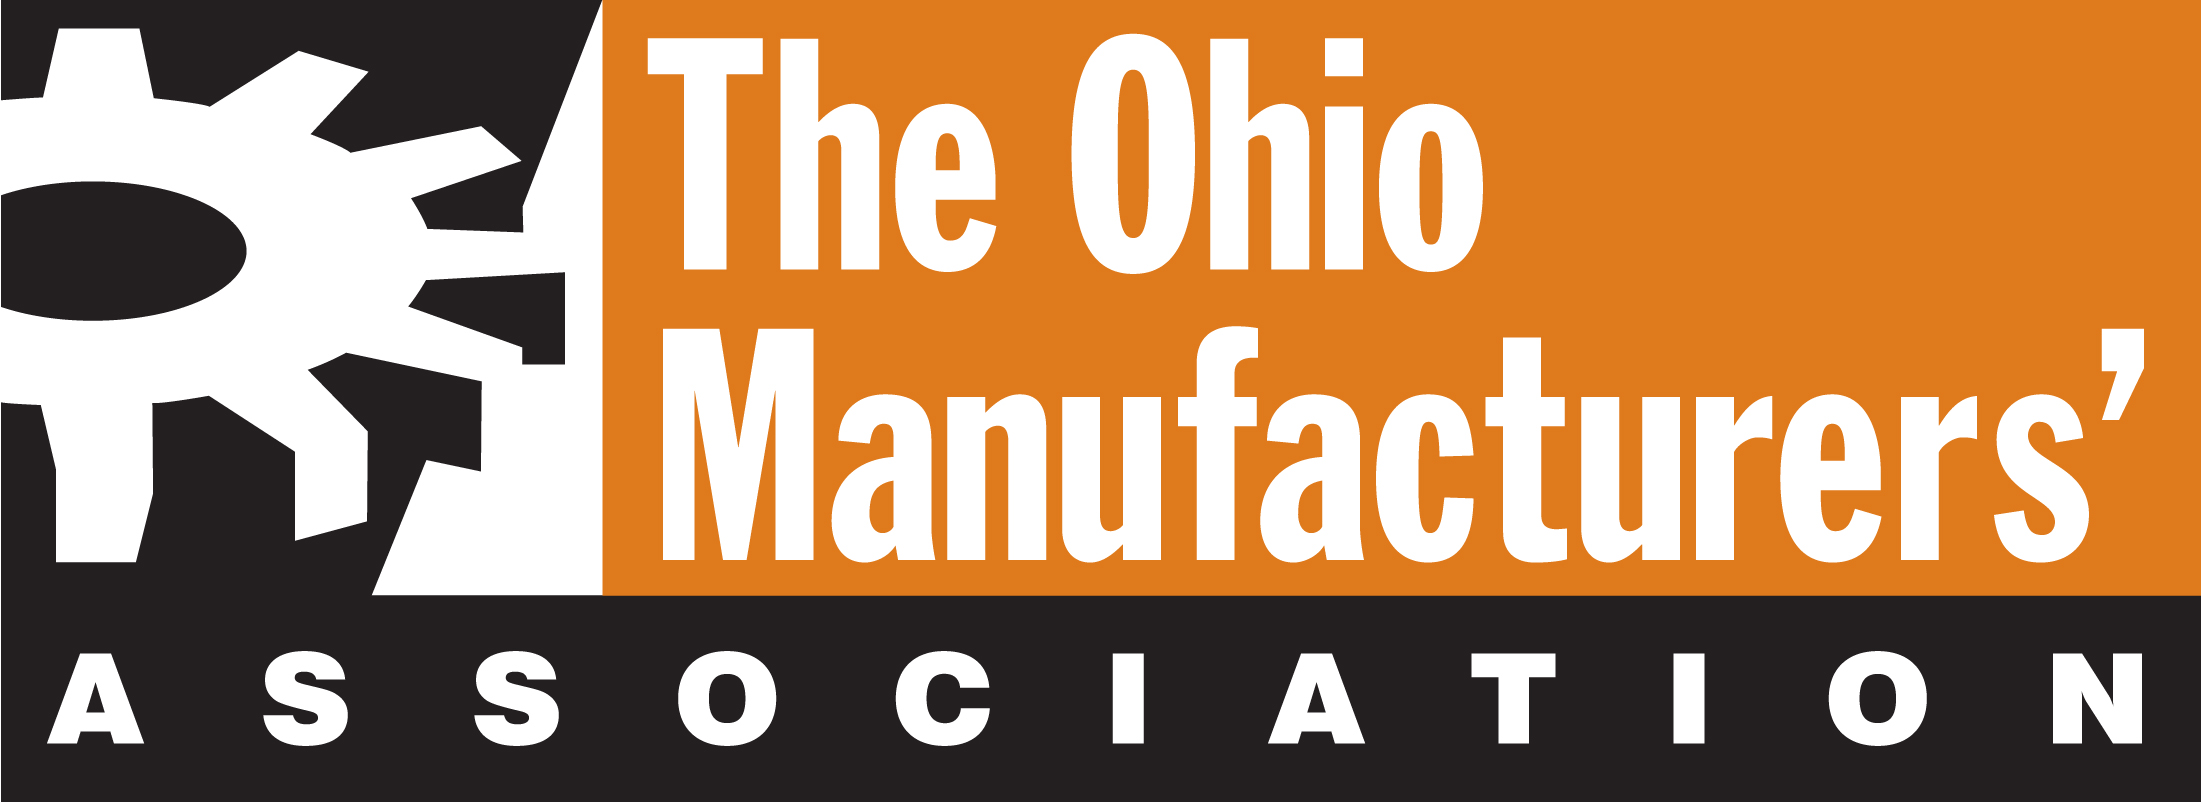 Ohio - The Heart of Manufacturing, New Technologies, and a Quality Workforce | Proto Plastics